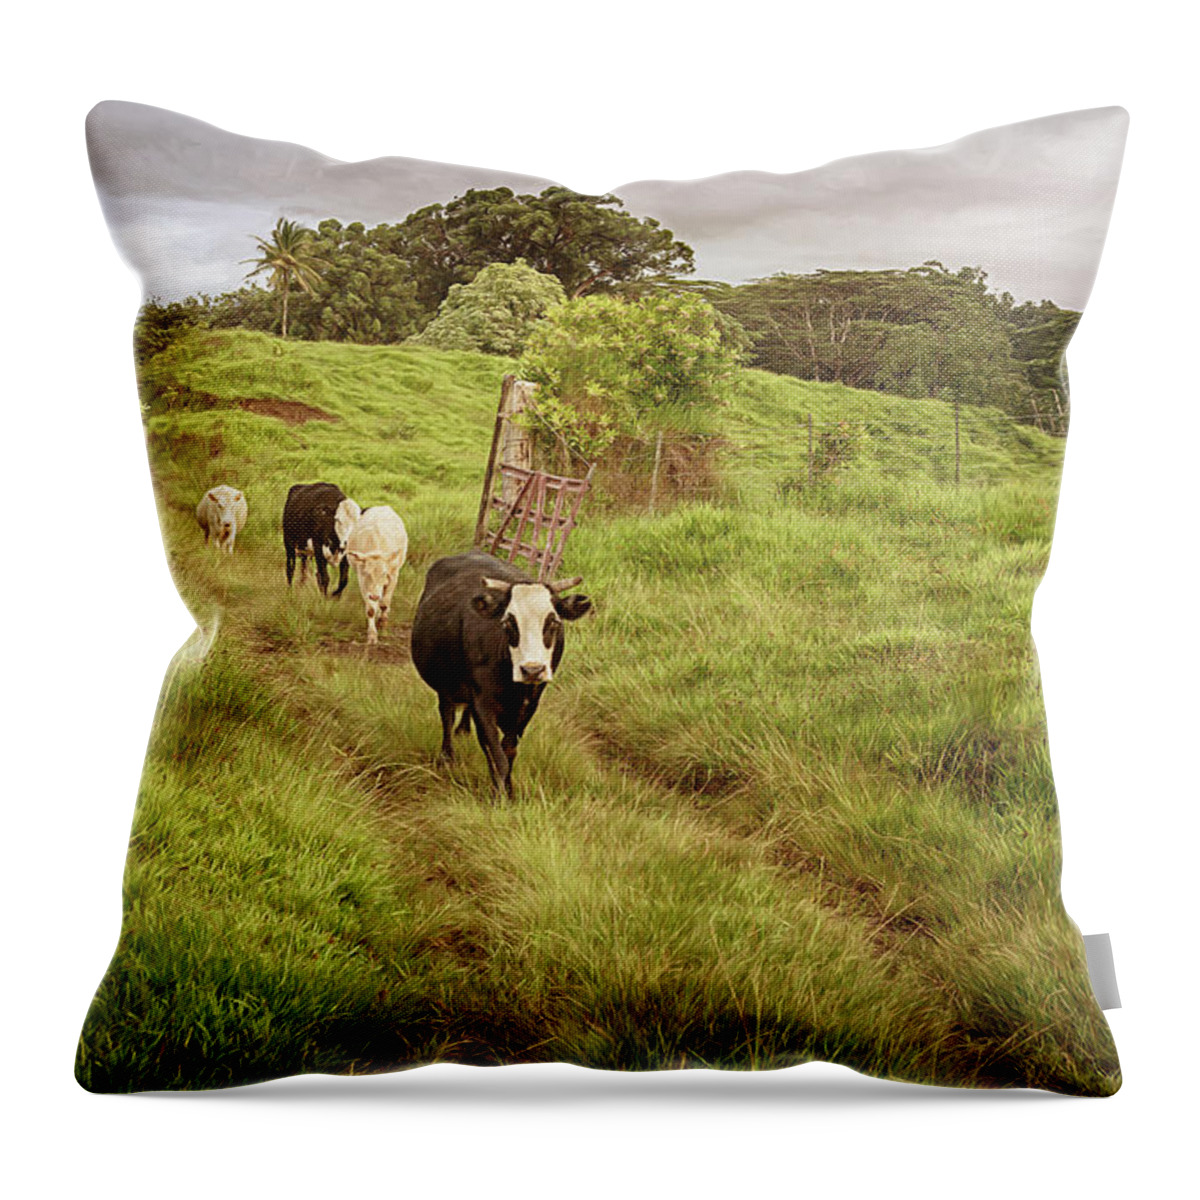 Cows Throw Pillow featuring the photograph Upcountry Ranch by Susan Rissi Tregoning